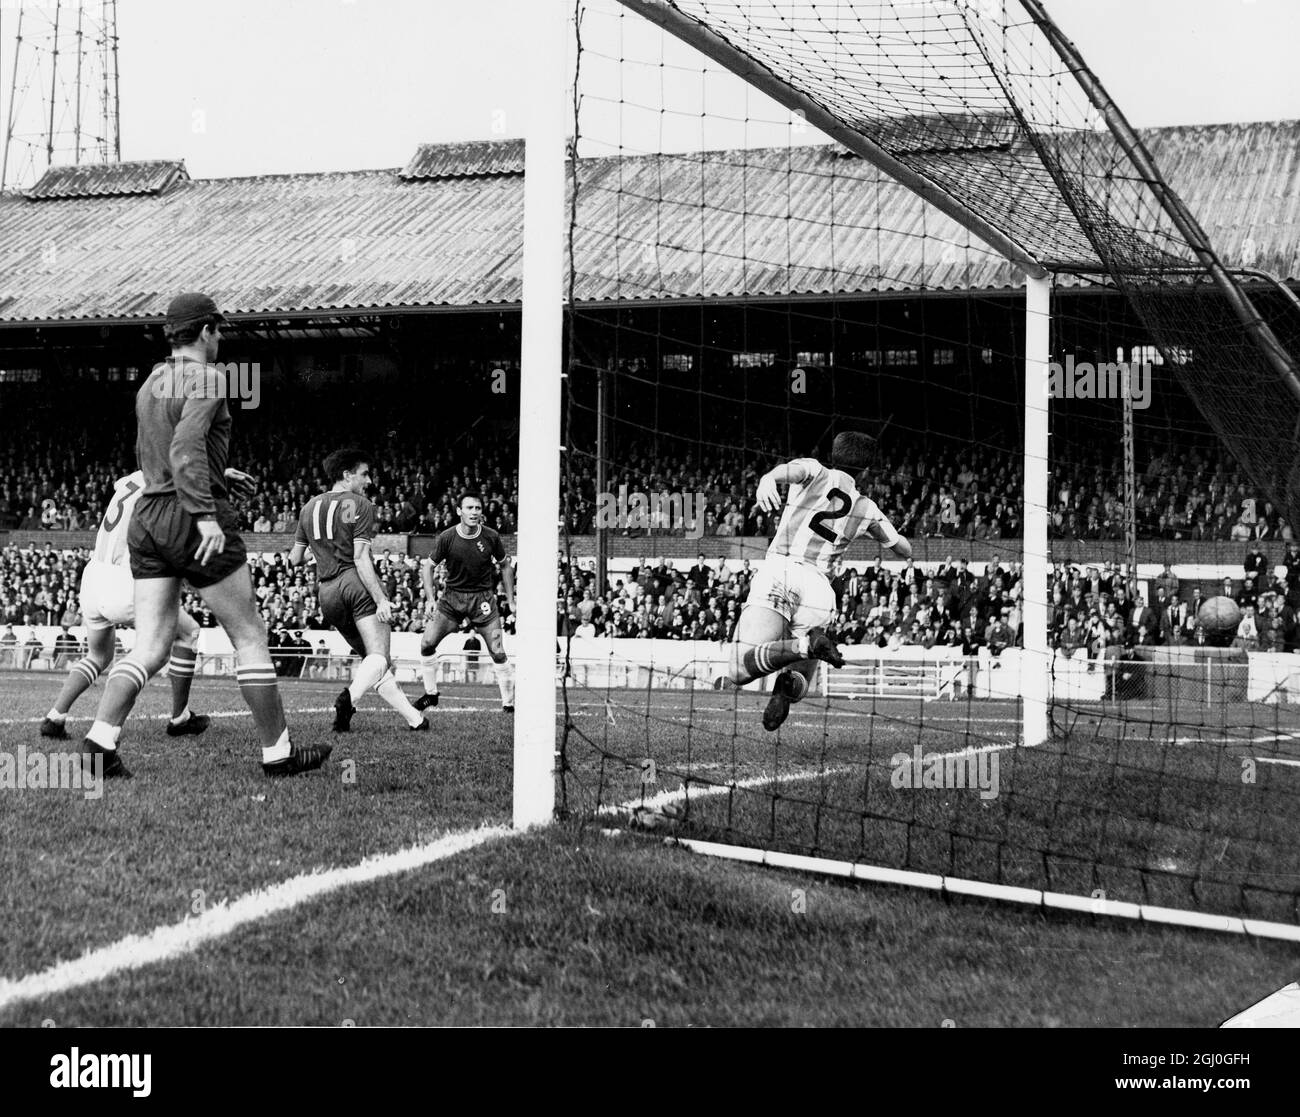 Chelsea v Stoke City Stoke goalkeeper, Leslie caught out of position as Tambling (Chelsea's outside-left) shoots past Asprey (Stoke's right-back), who makes a desperate effort to save on the line during the match at Stamford Bridge. 17th October 1964 Stock Photo